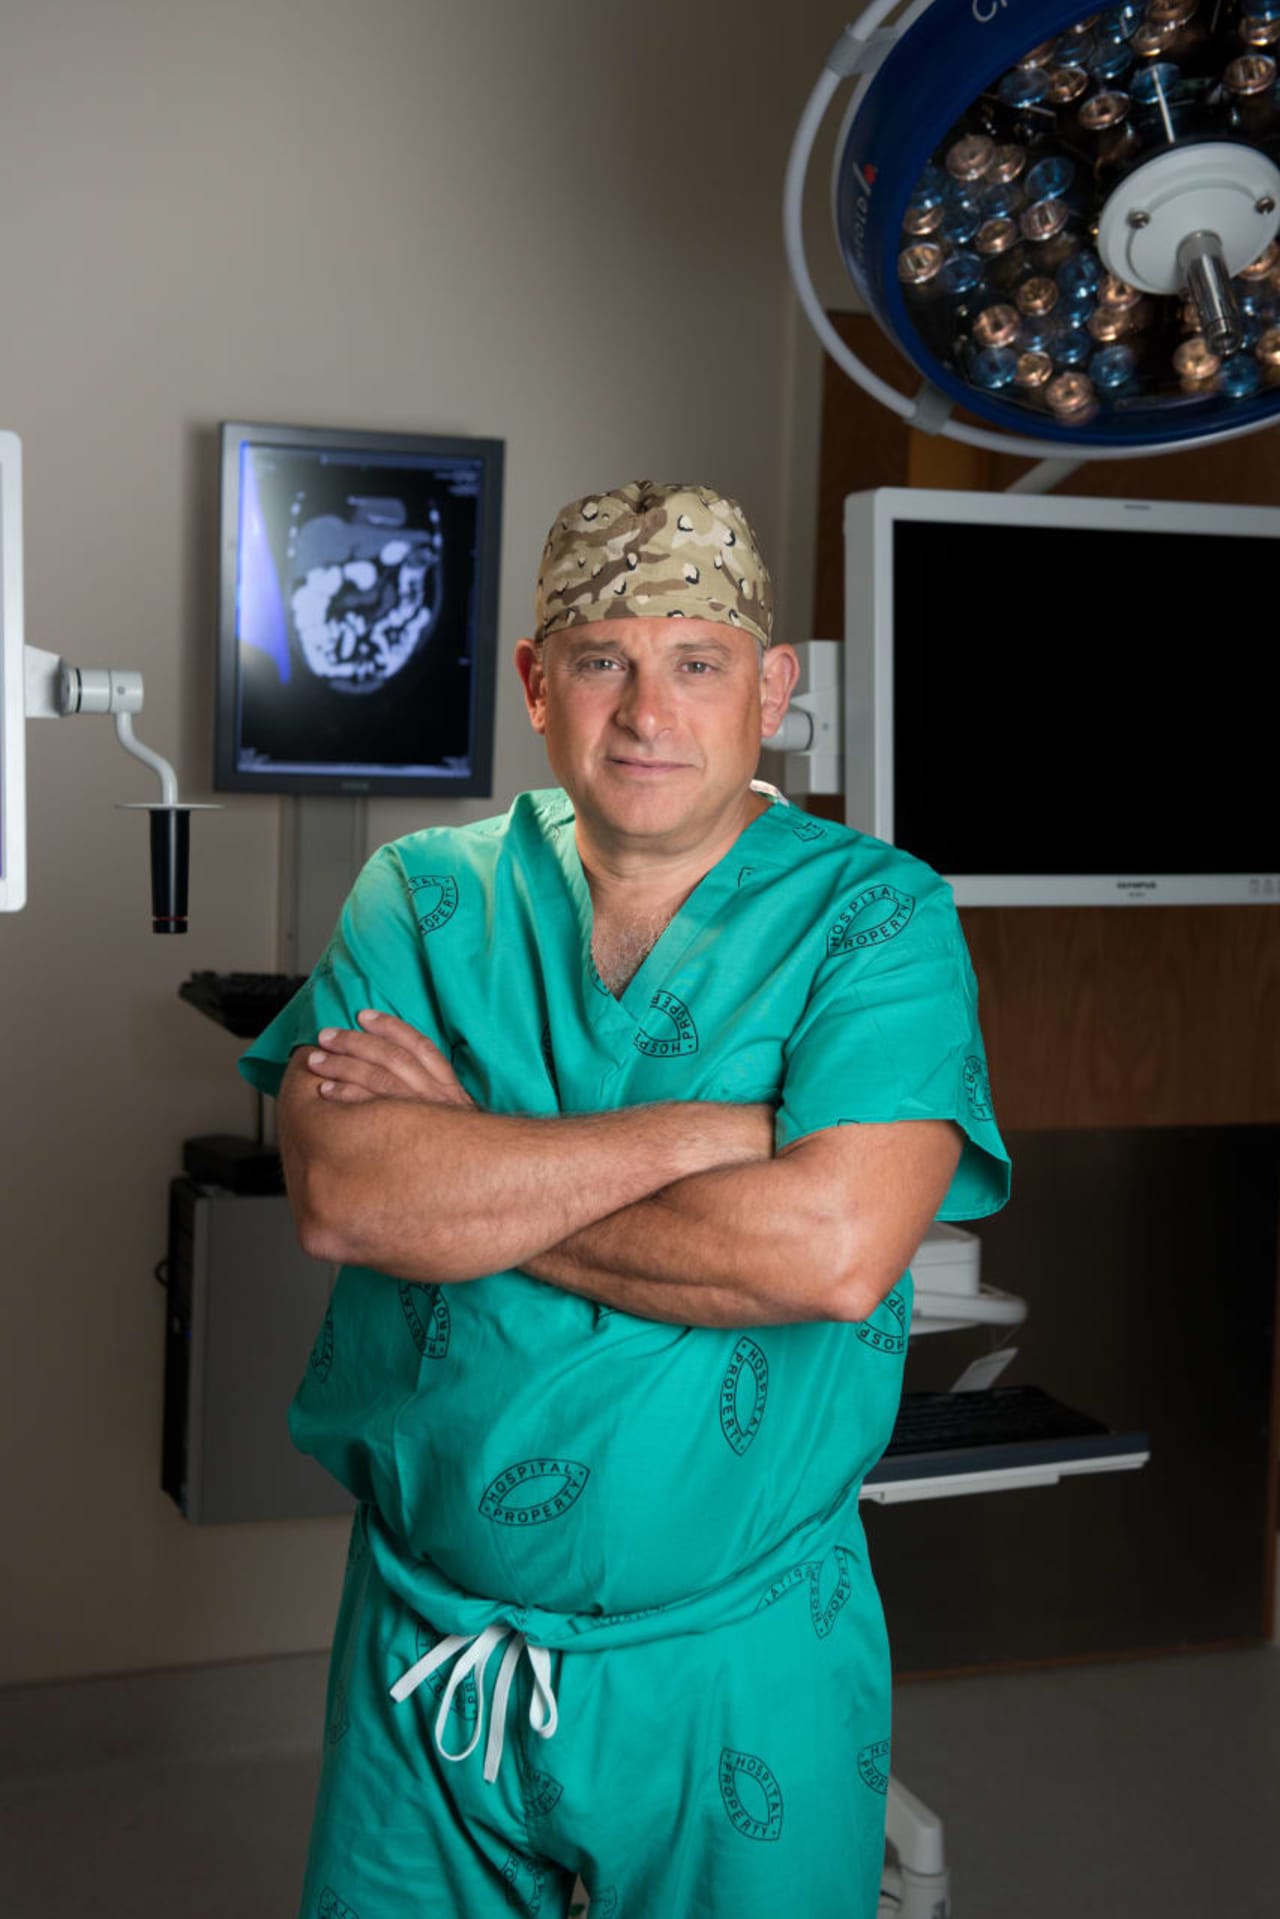 Dr. Robert Raniolo of Hudson Valley Surgical Group.